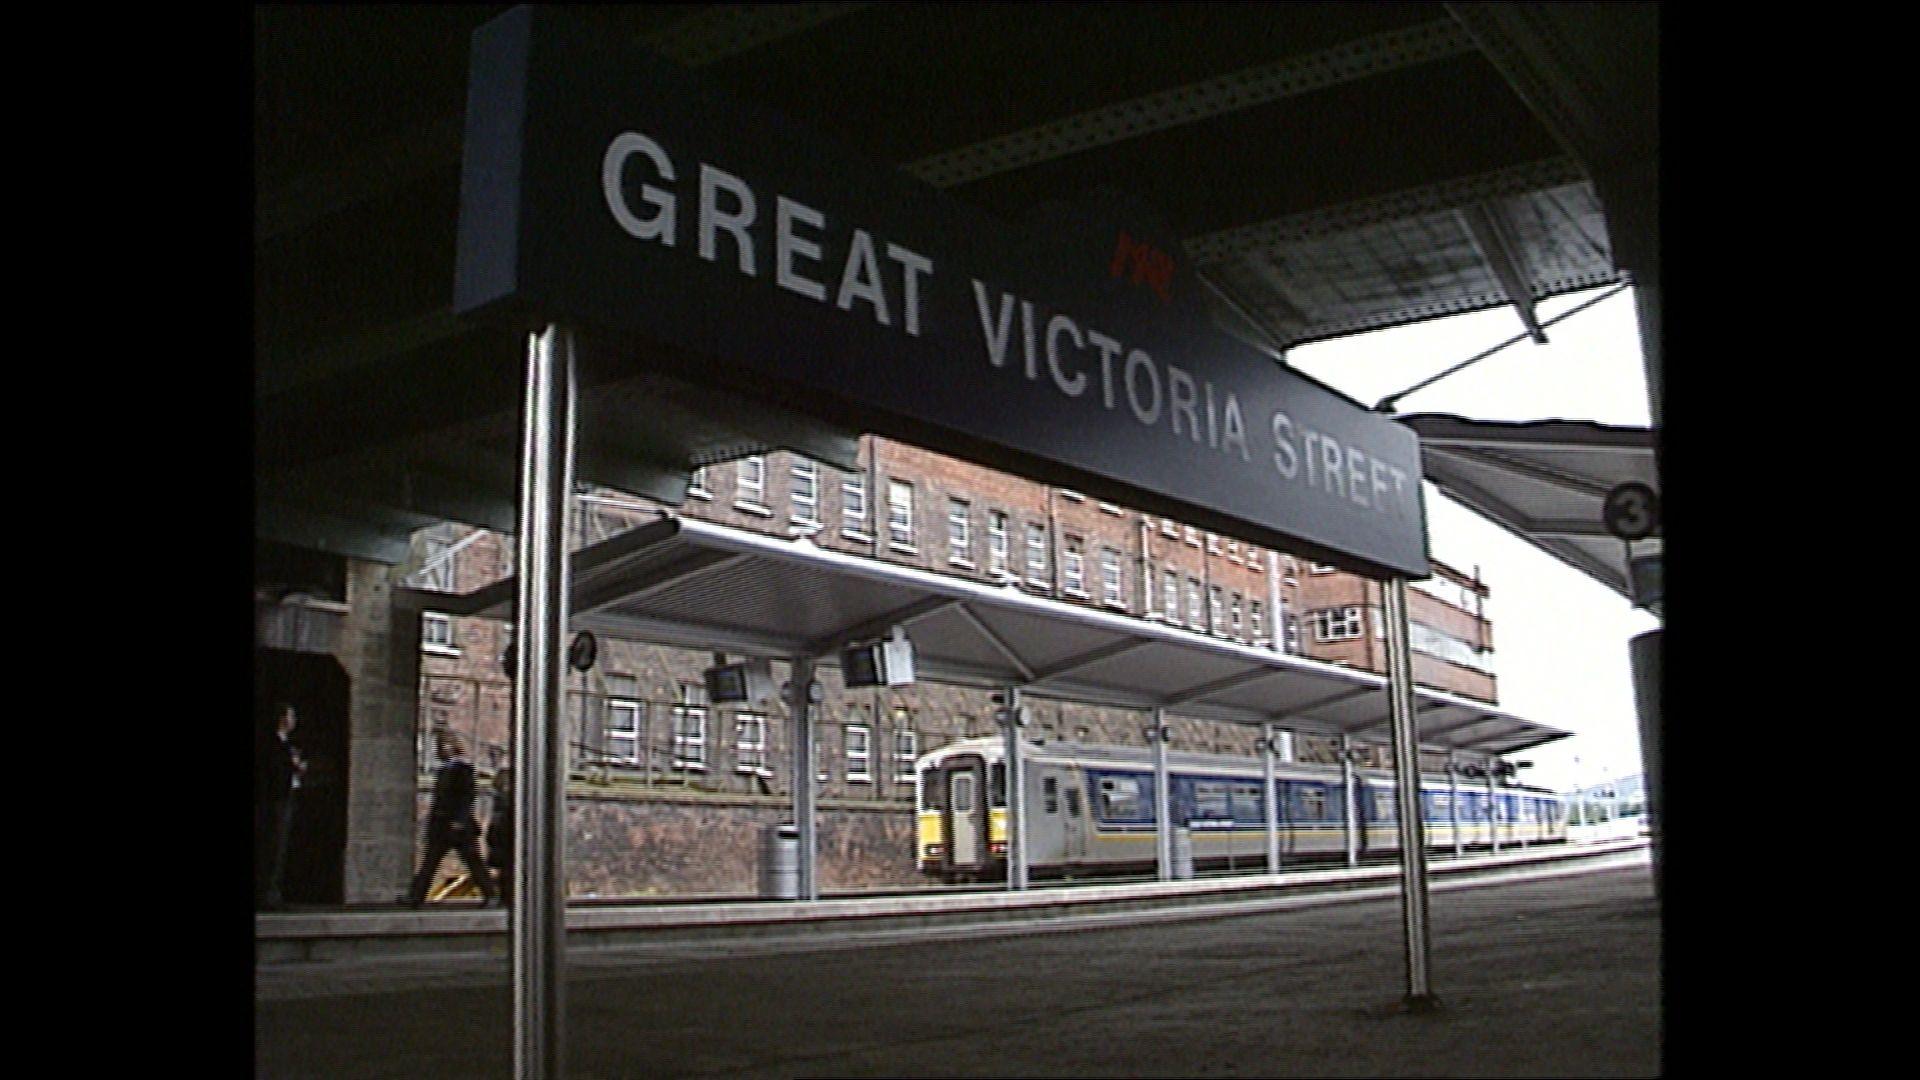 great victoria street: station closing after 200 years